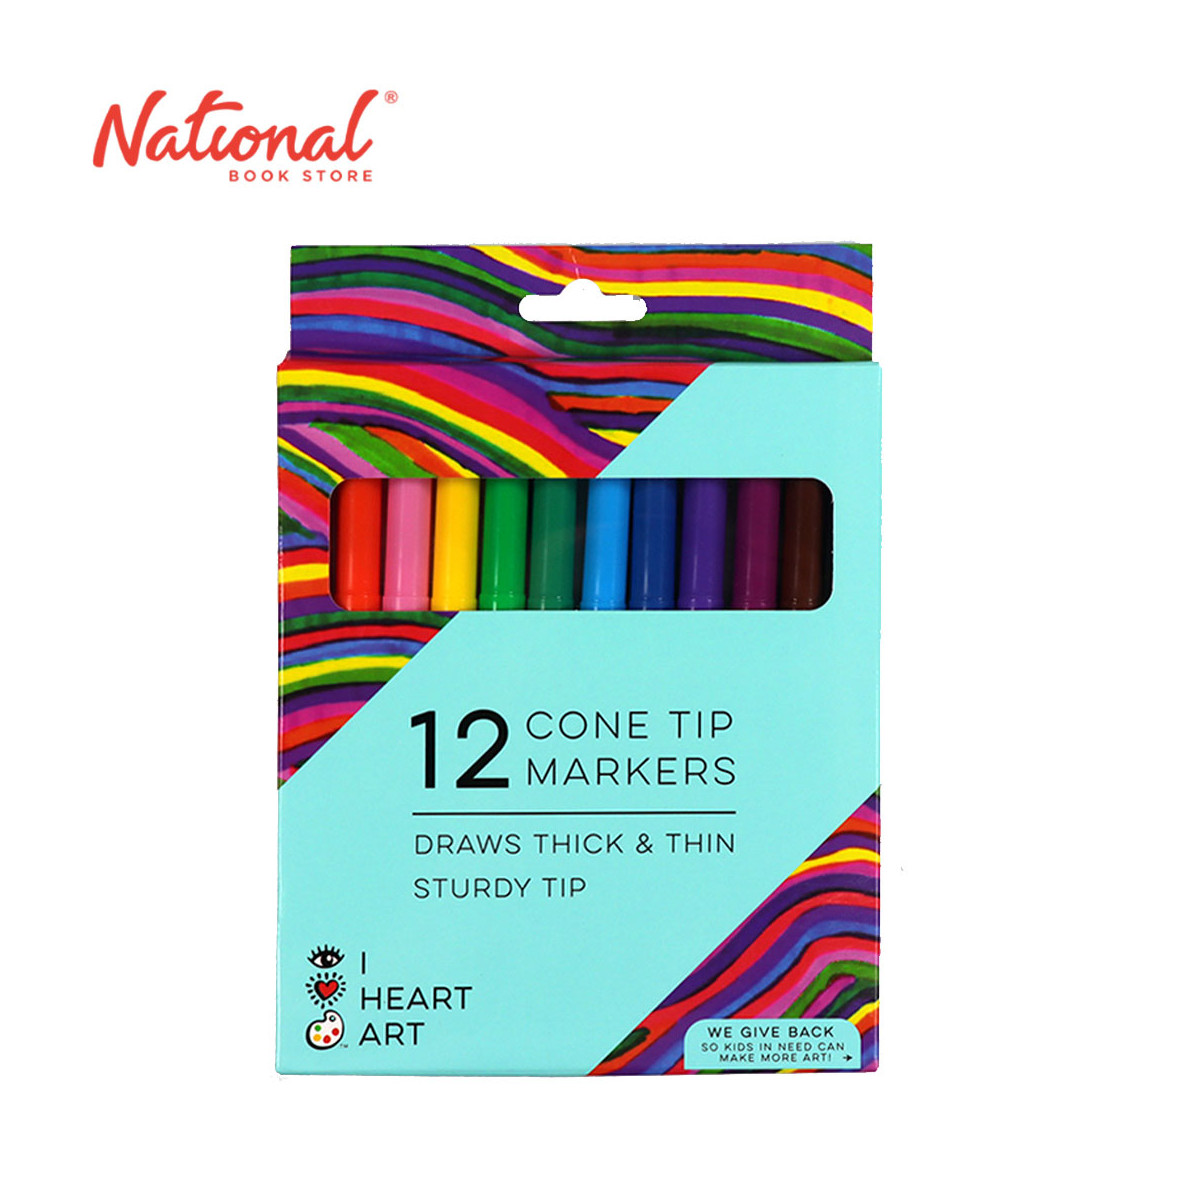 iHeartArt Cone Tip Markers 12 Assorted Colors 6012 - Arts & Crafts Supplies